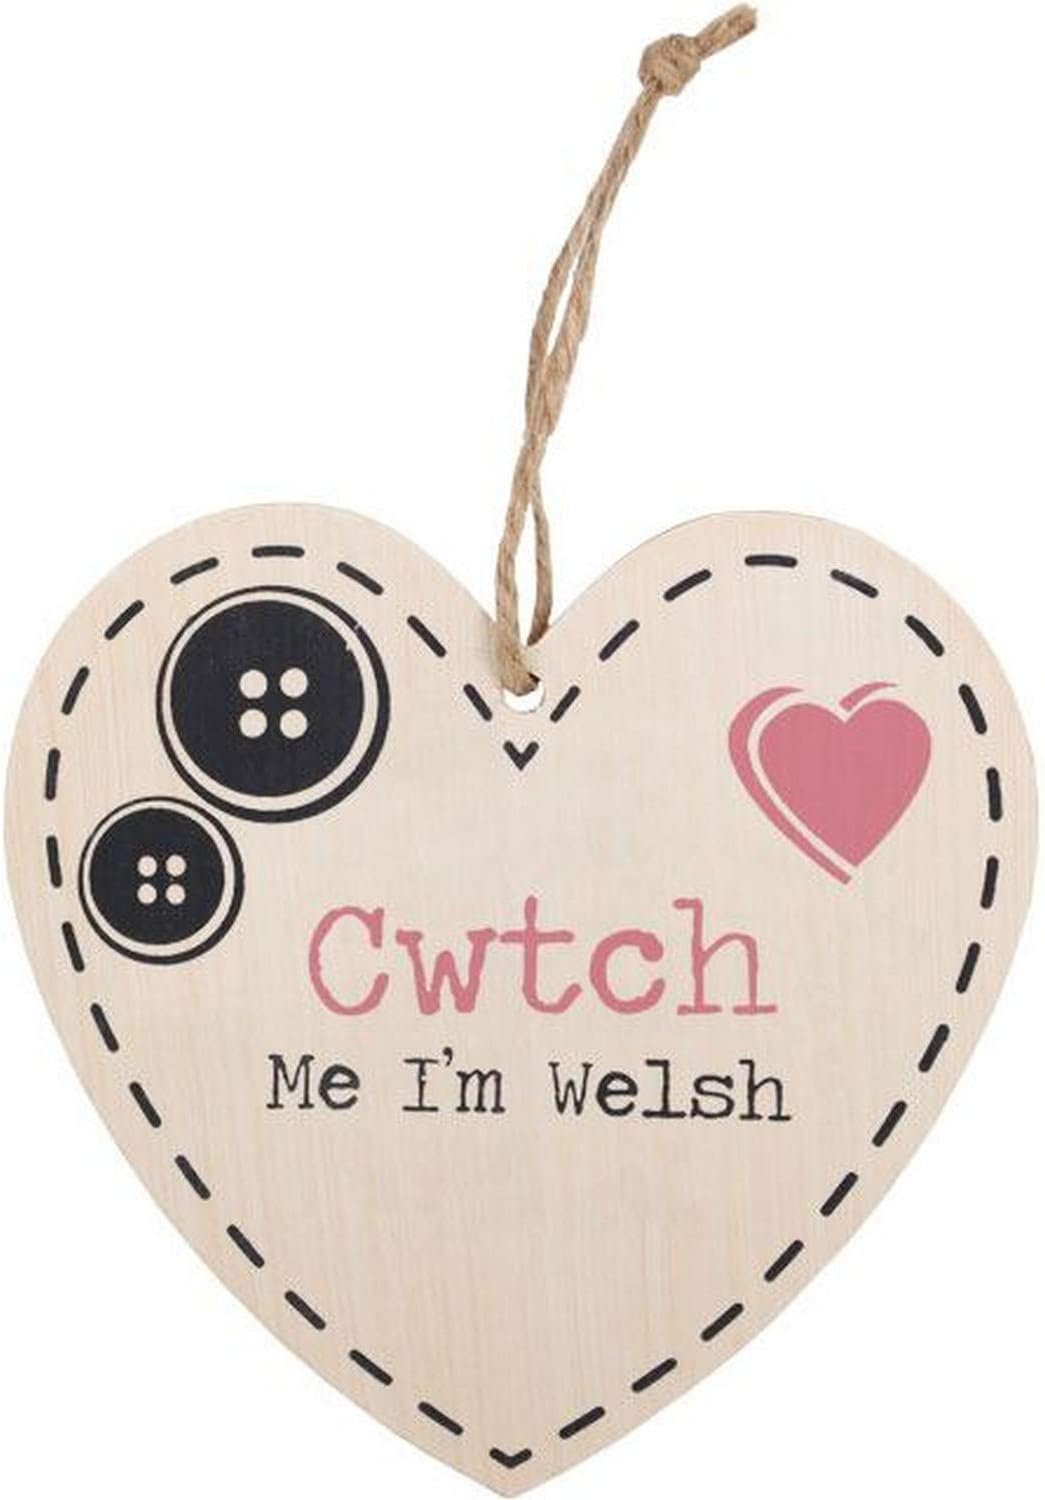 Cwtch Me I'm Welsh Hanging Heart Sign